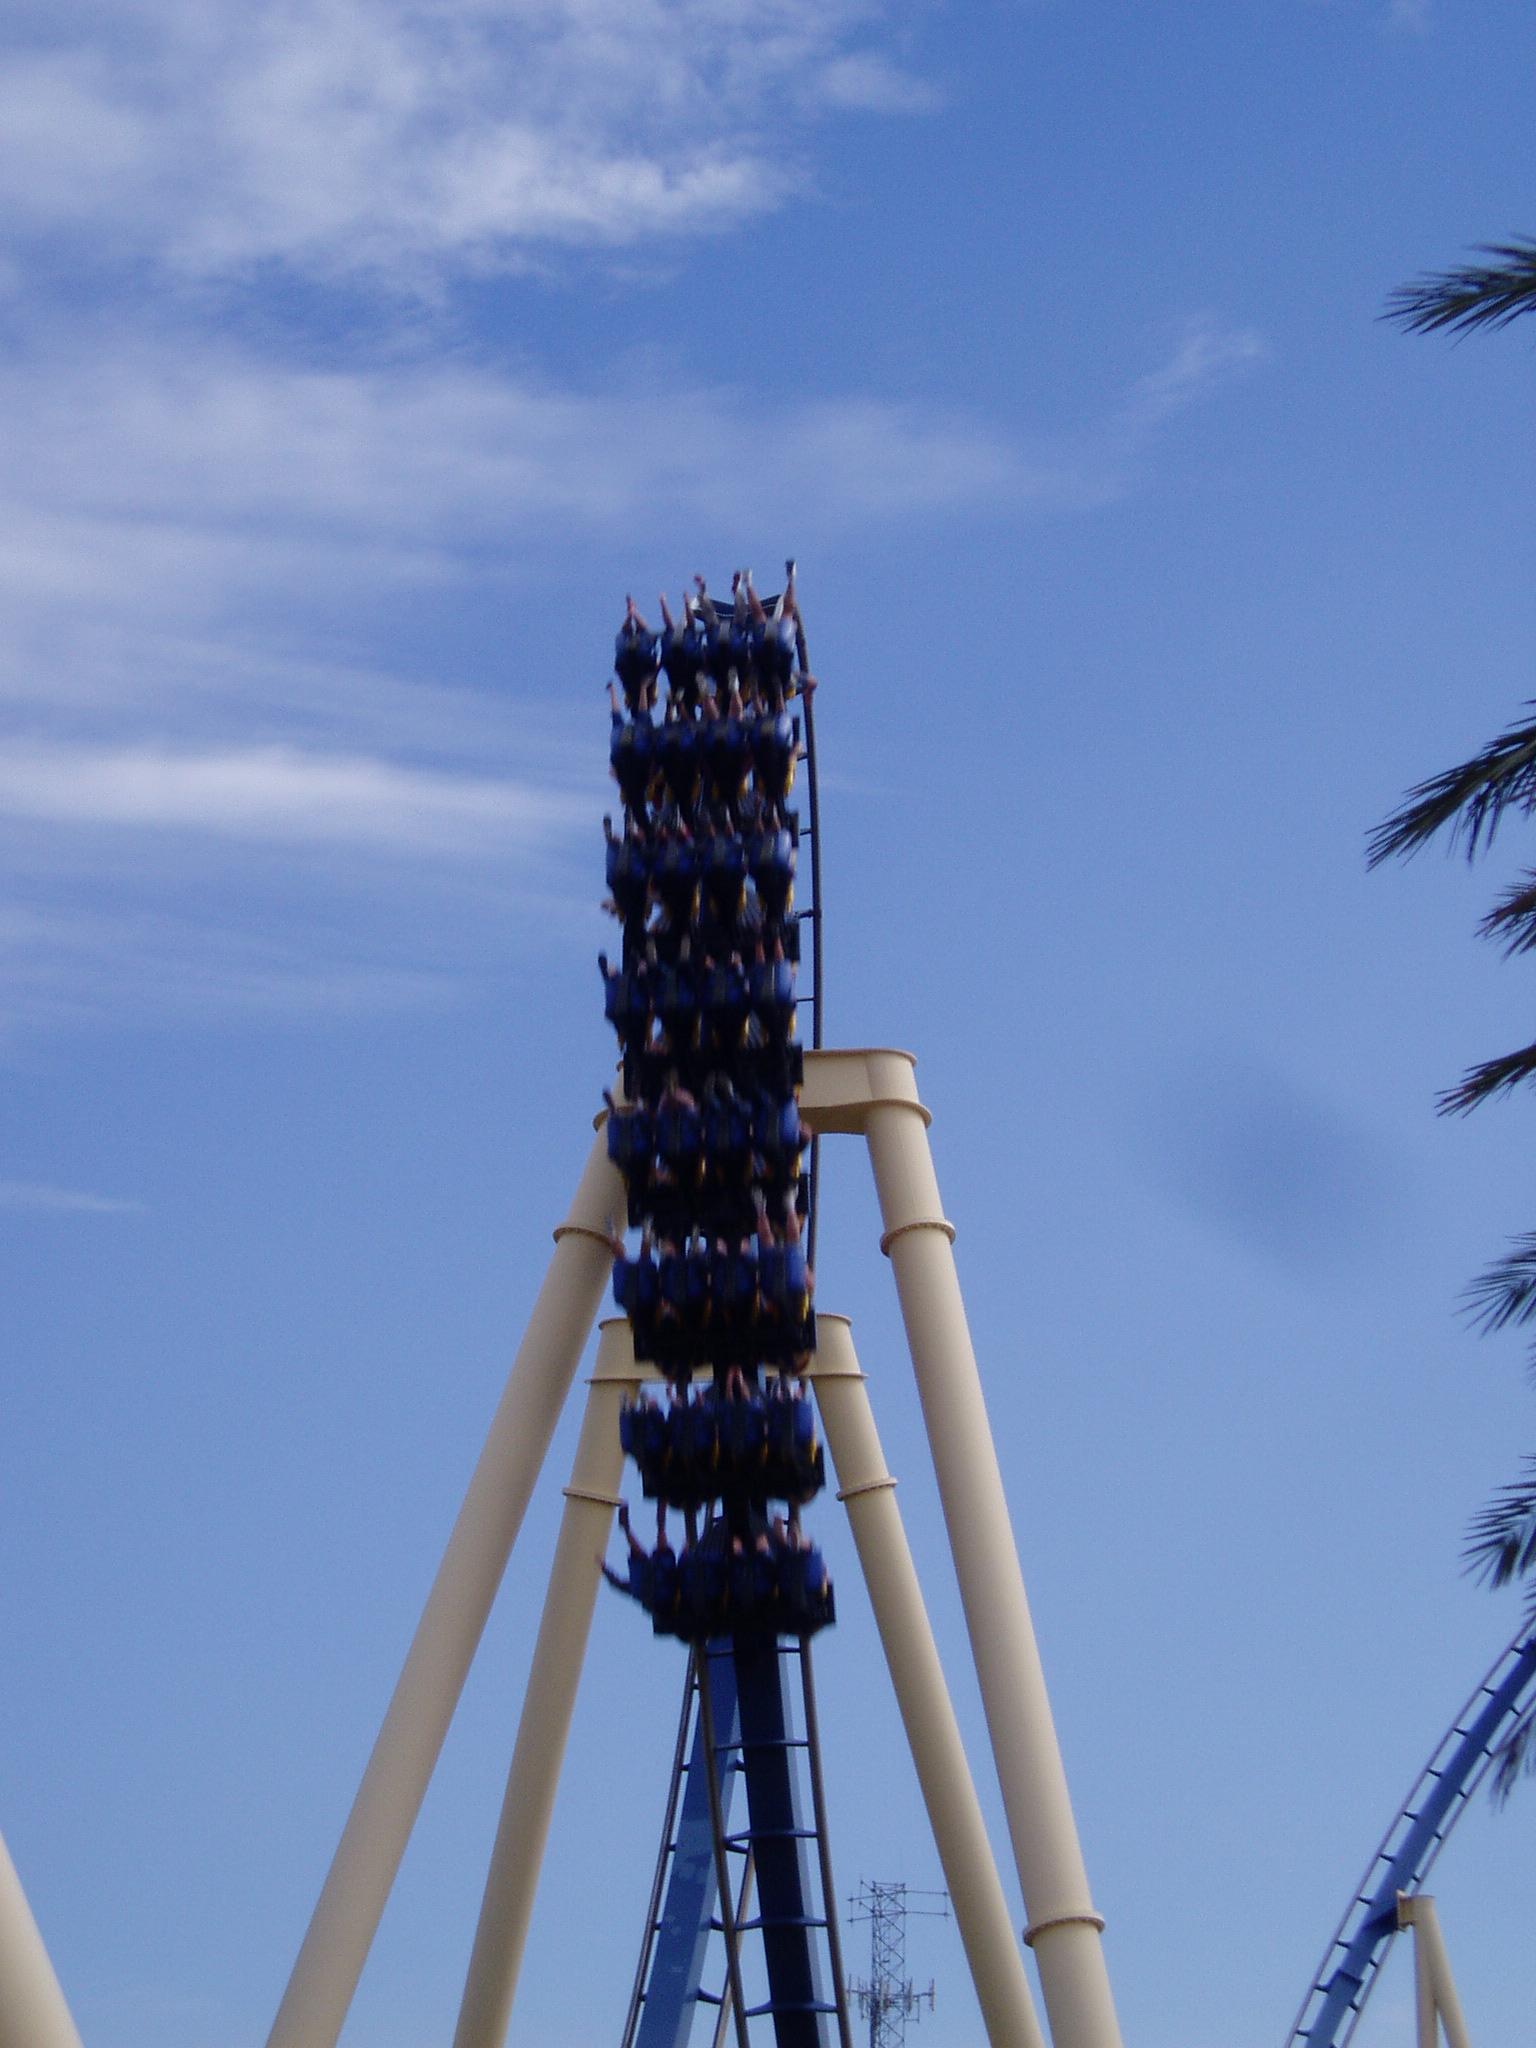 You are currently viewing Montu (Busch Gardens Tampa